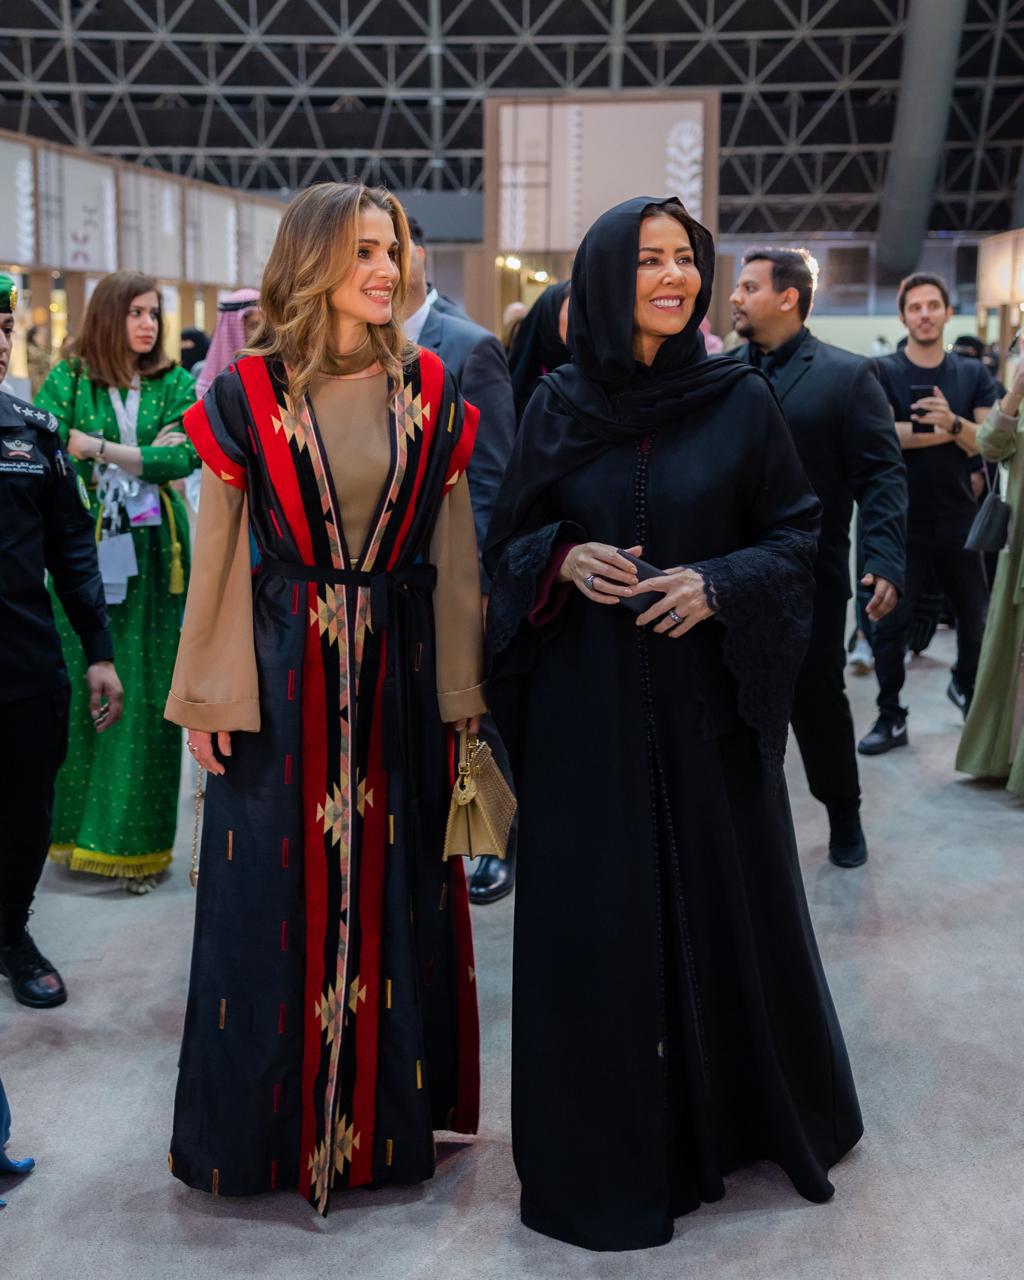 Queen Rania attends Bisat Al Reeh Exhibition opening, visits Islamic Arts Biennale in Jeddah